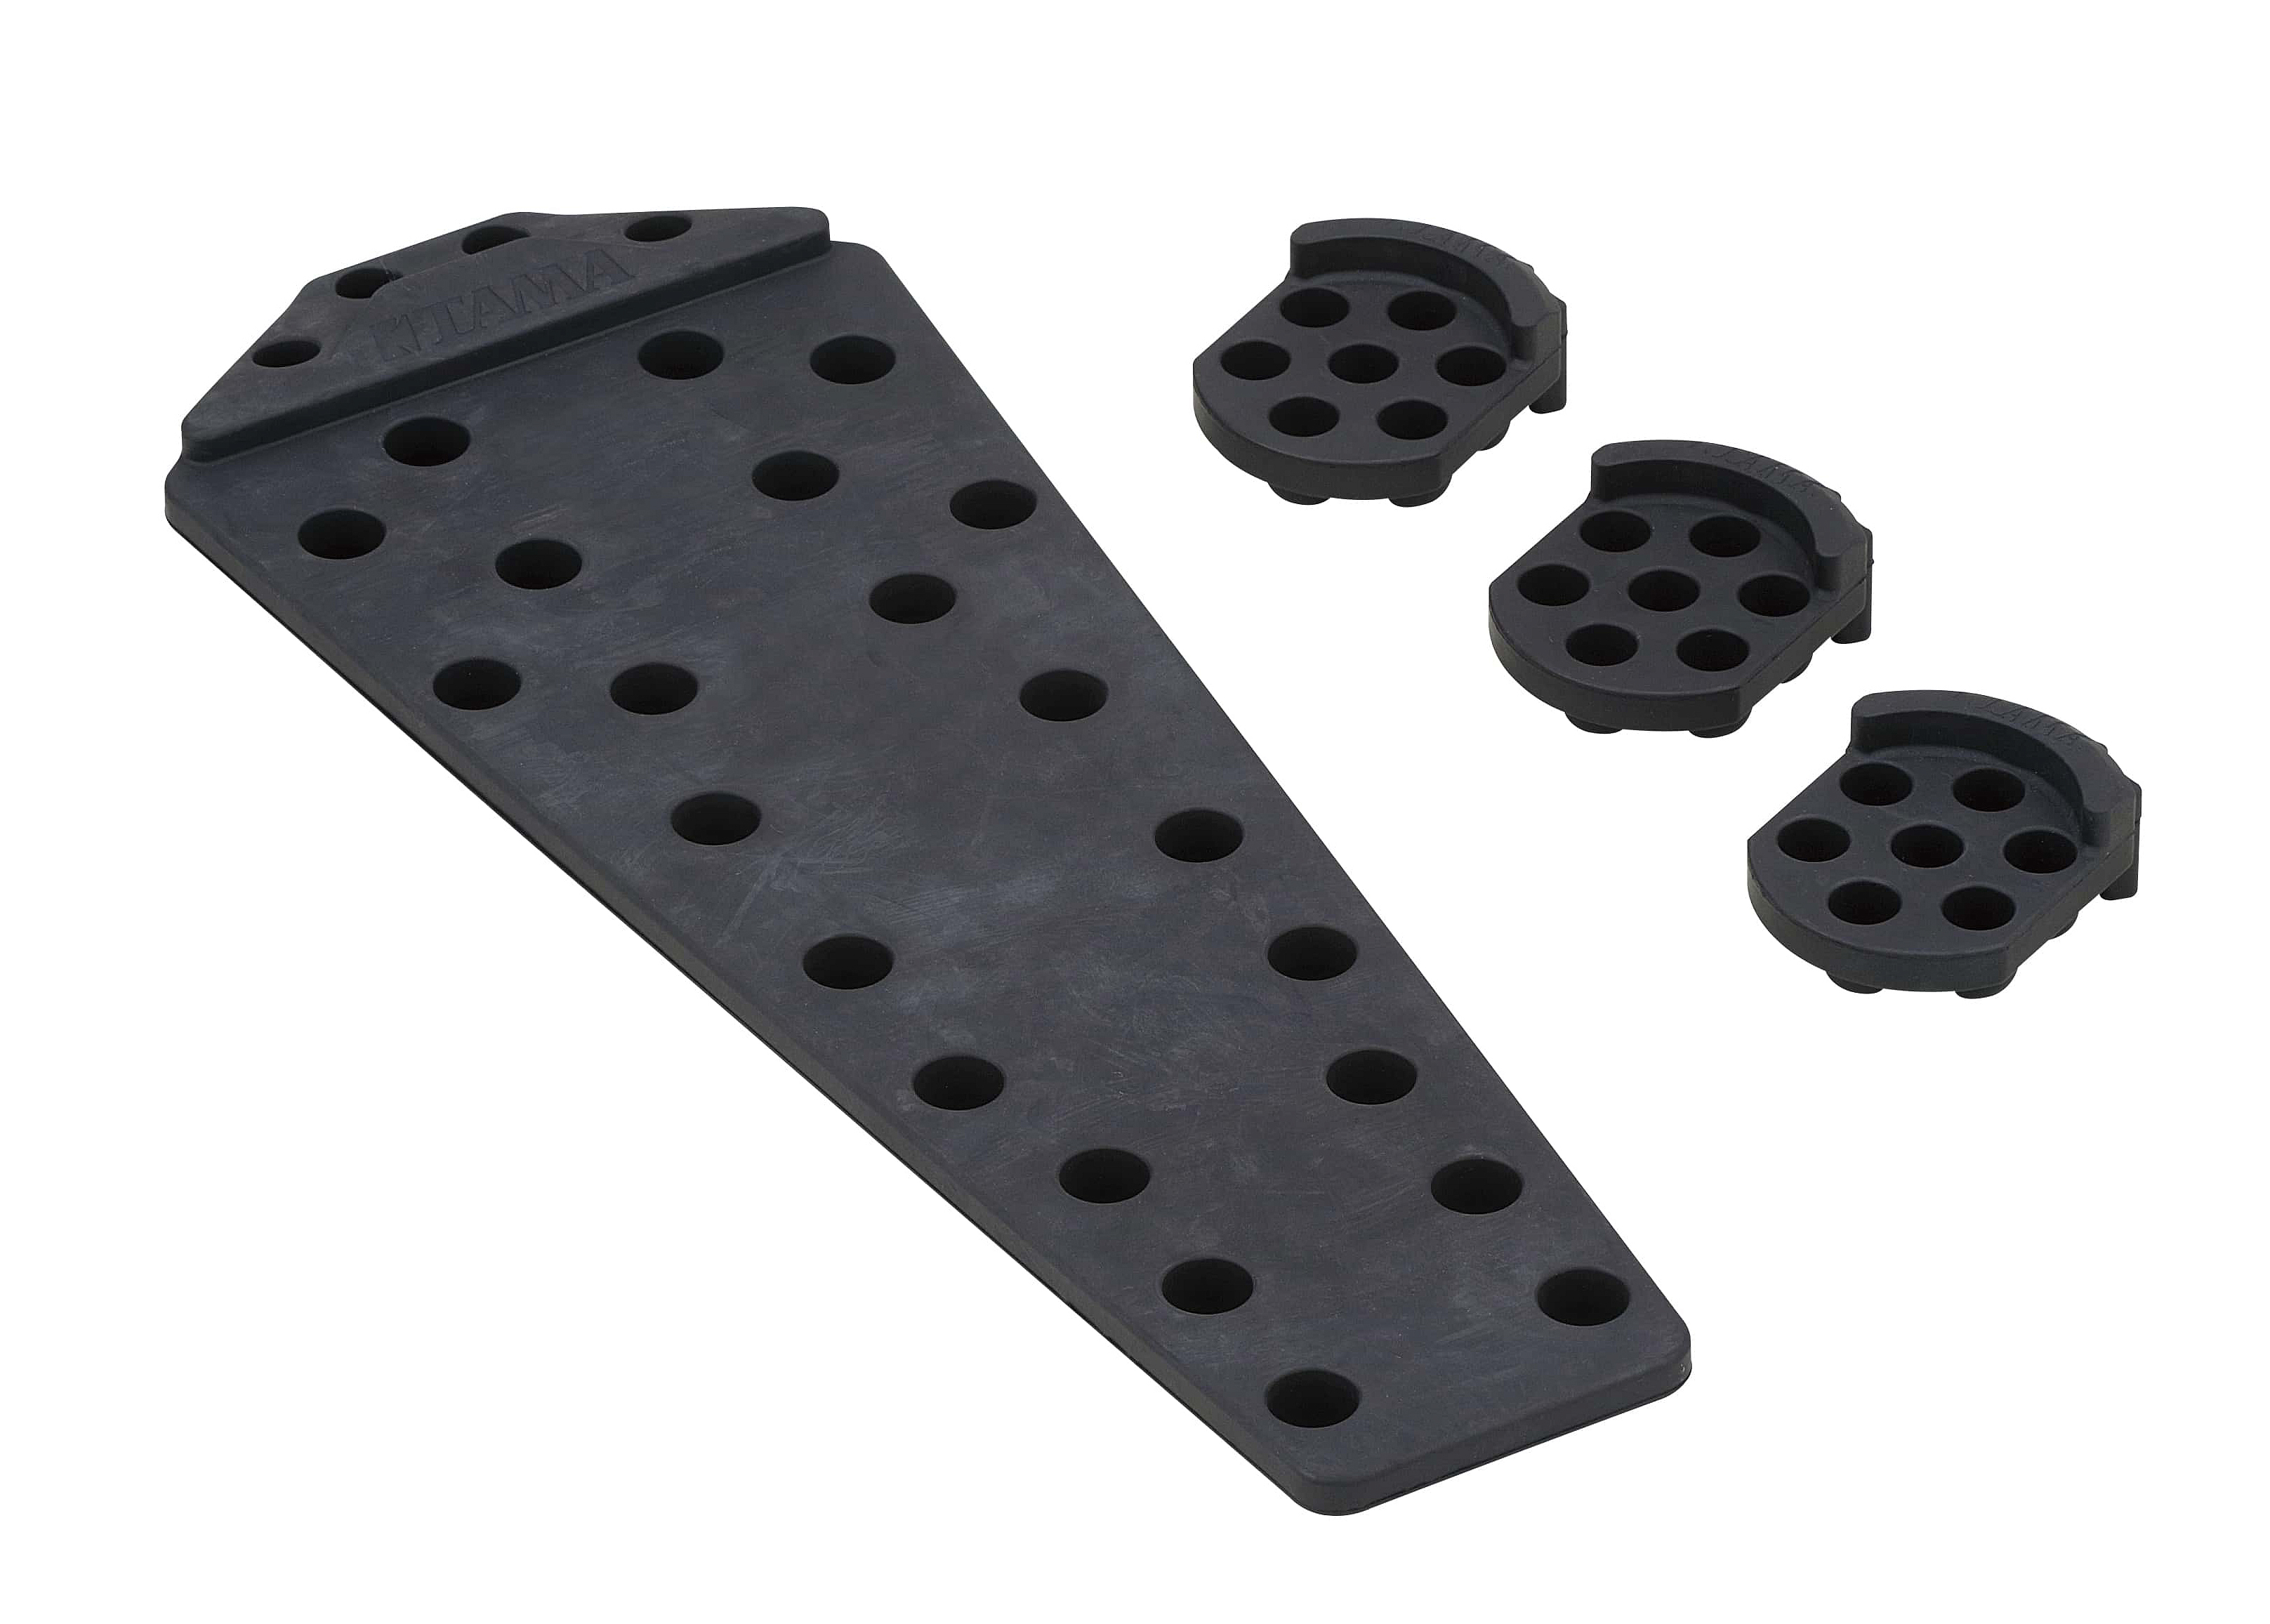 TAMA TIBS4 ISO-BASE SOUND REDUCTION PEDAL & LEG PADS PACKAGE INCLUDING TIBP1 X 1 & TIBL1 X 3 - фото 1